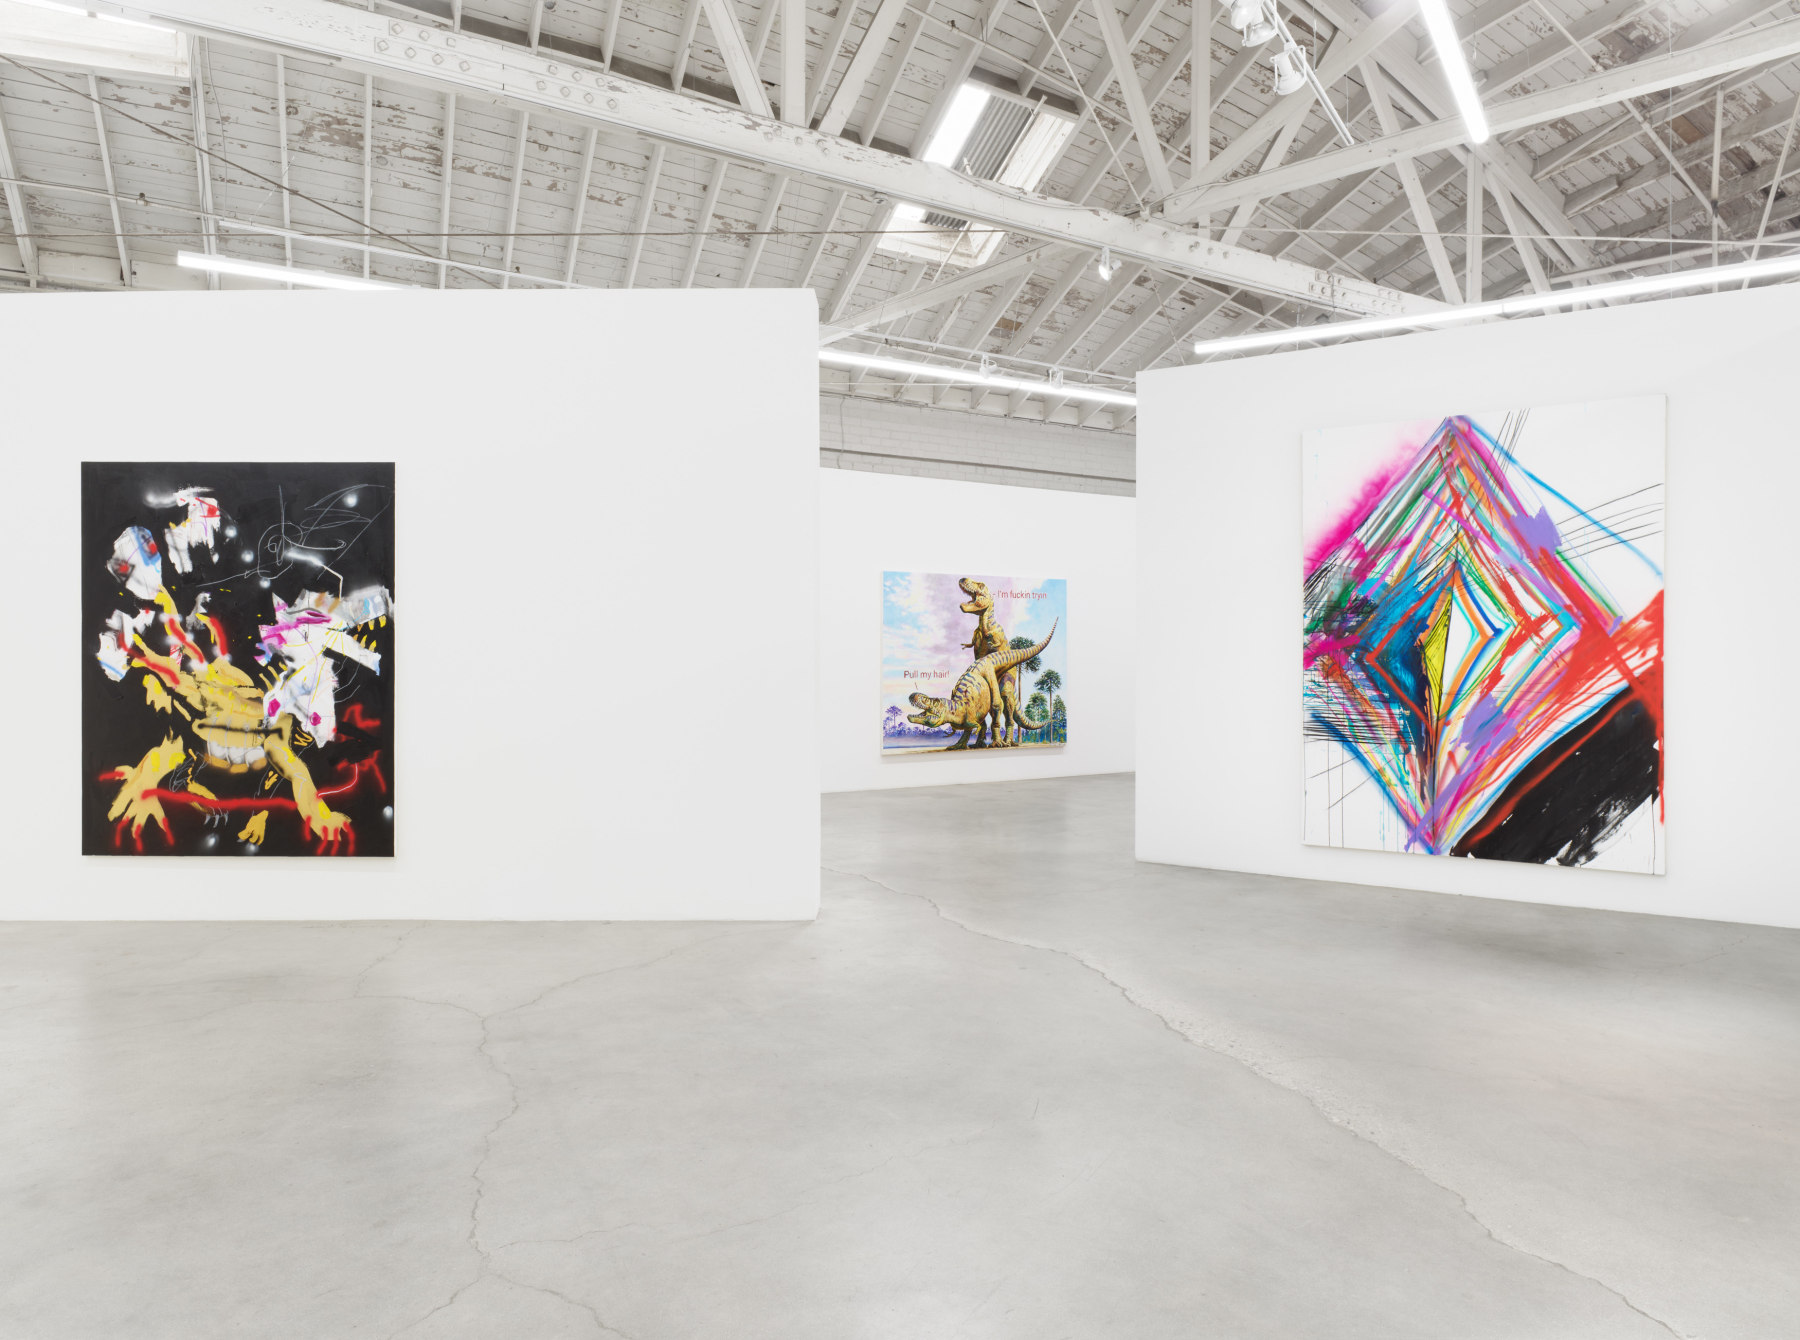 Installation view of Majeure Force, Part One, featuring works by Robert Nava, Christine Wang, and Andrea Marie Breiling. 